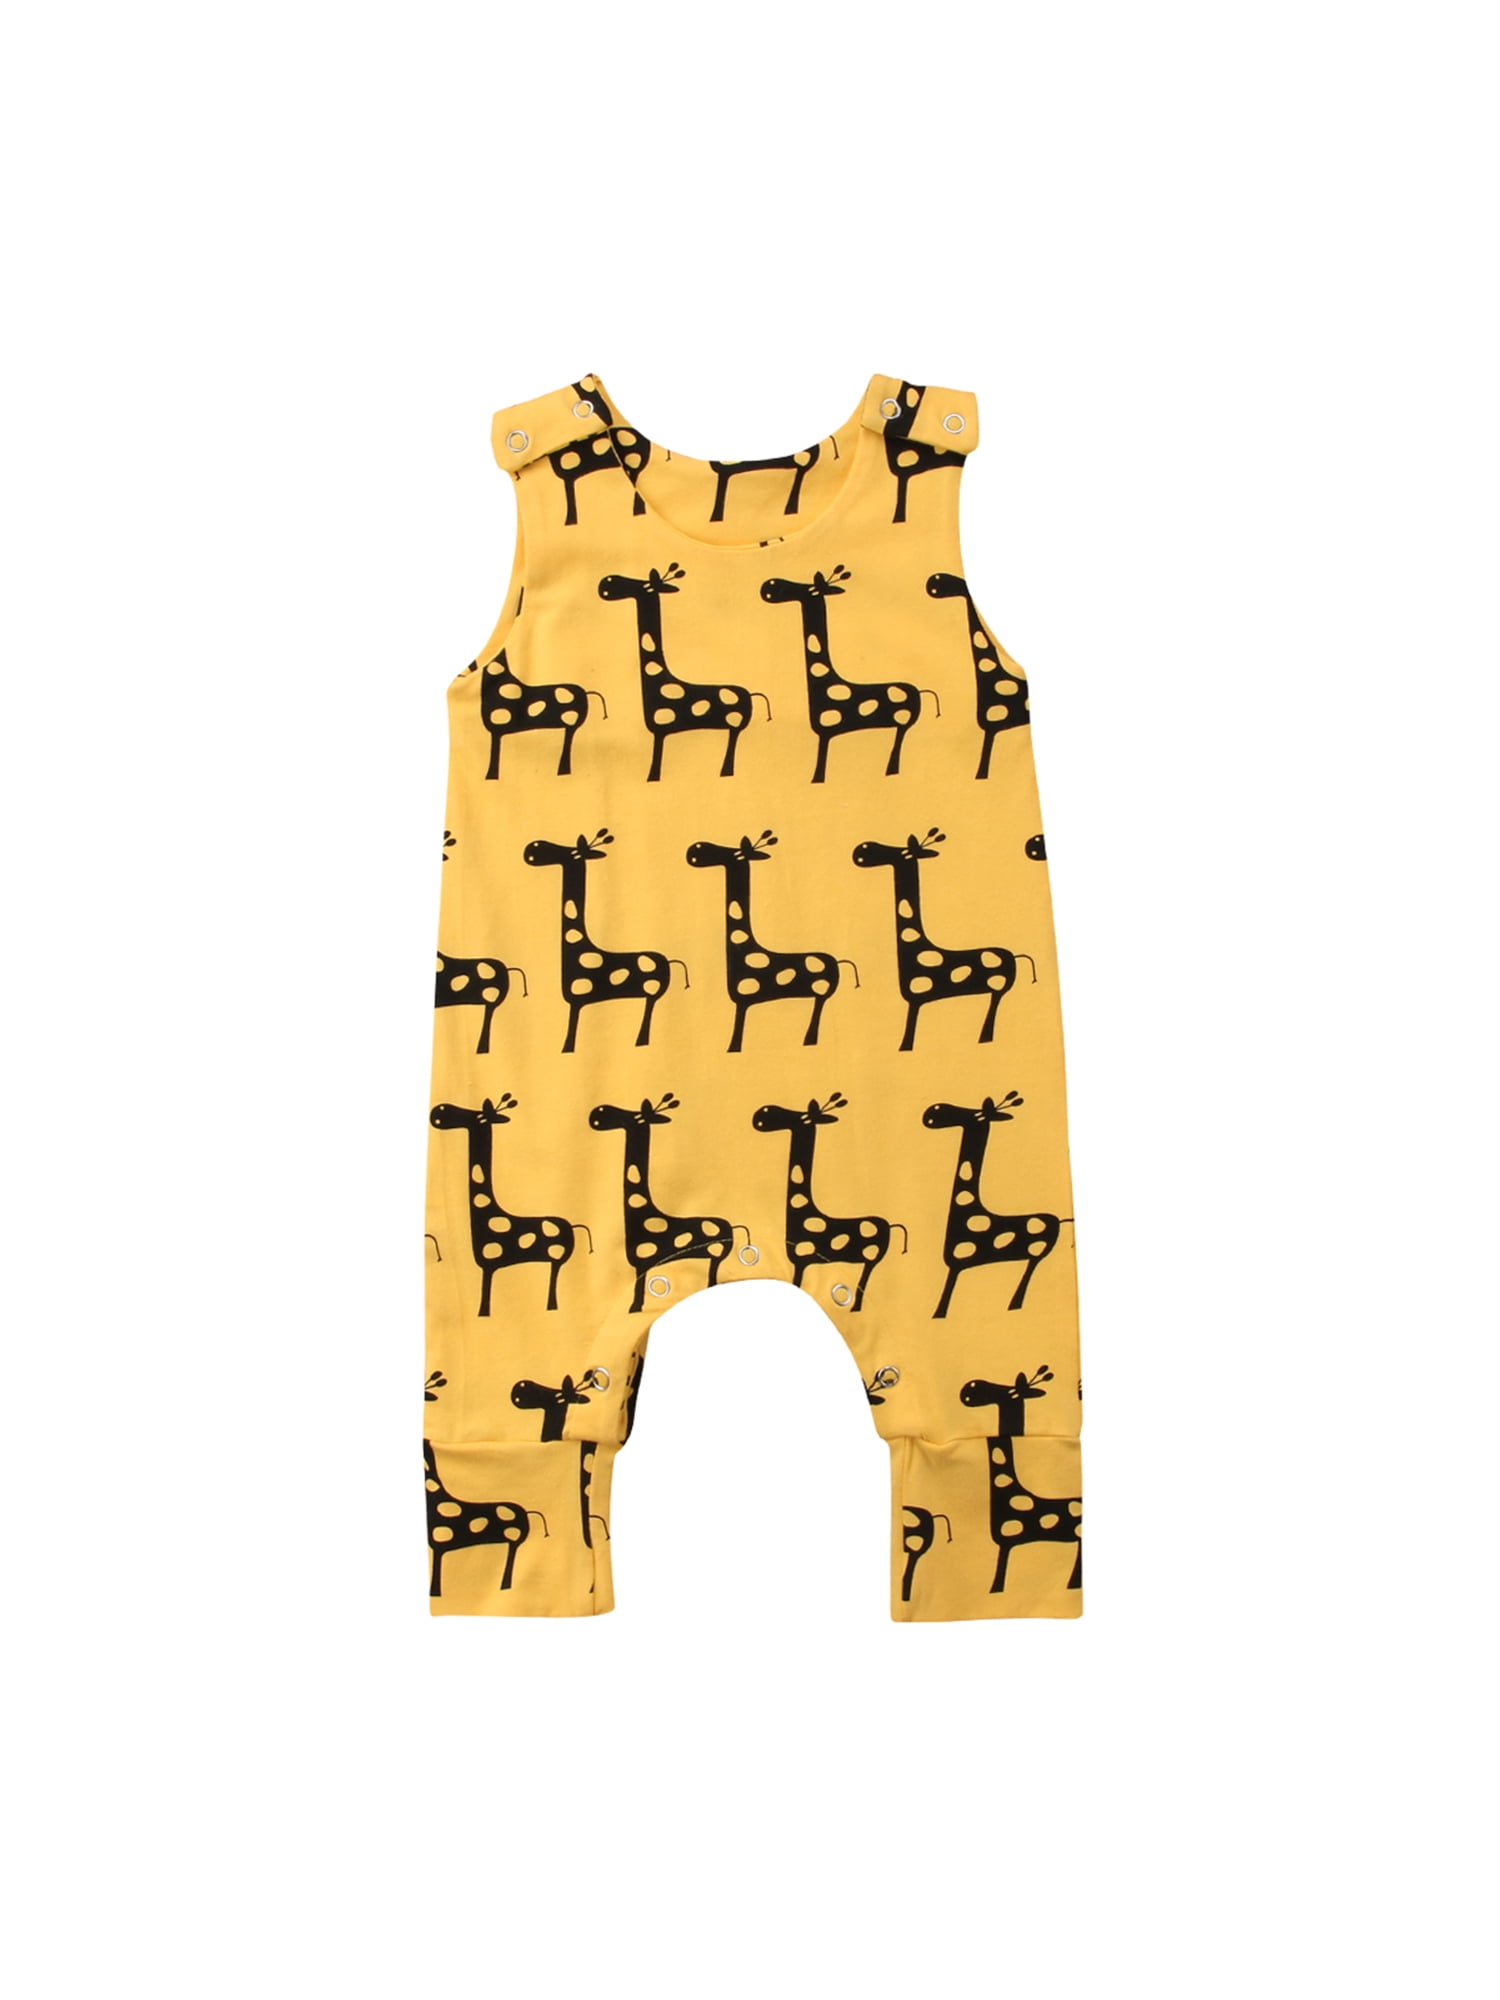 Newborn Infant Baby Boy Girl Sleeveless Cartoon Romper Jumpsuit Outfits Clothes 